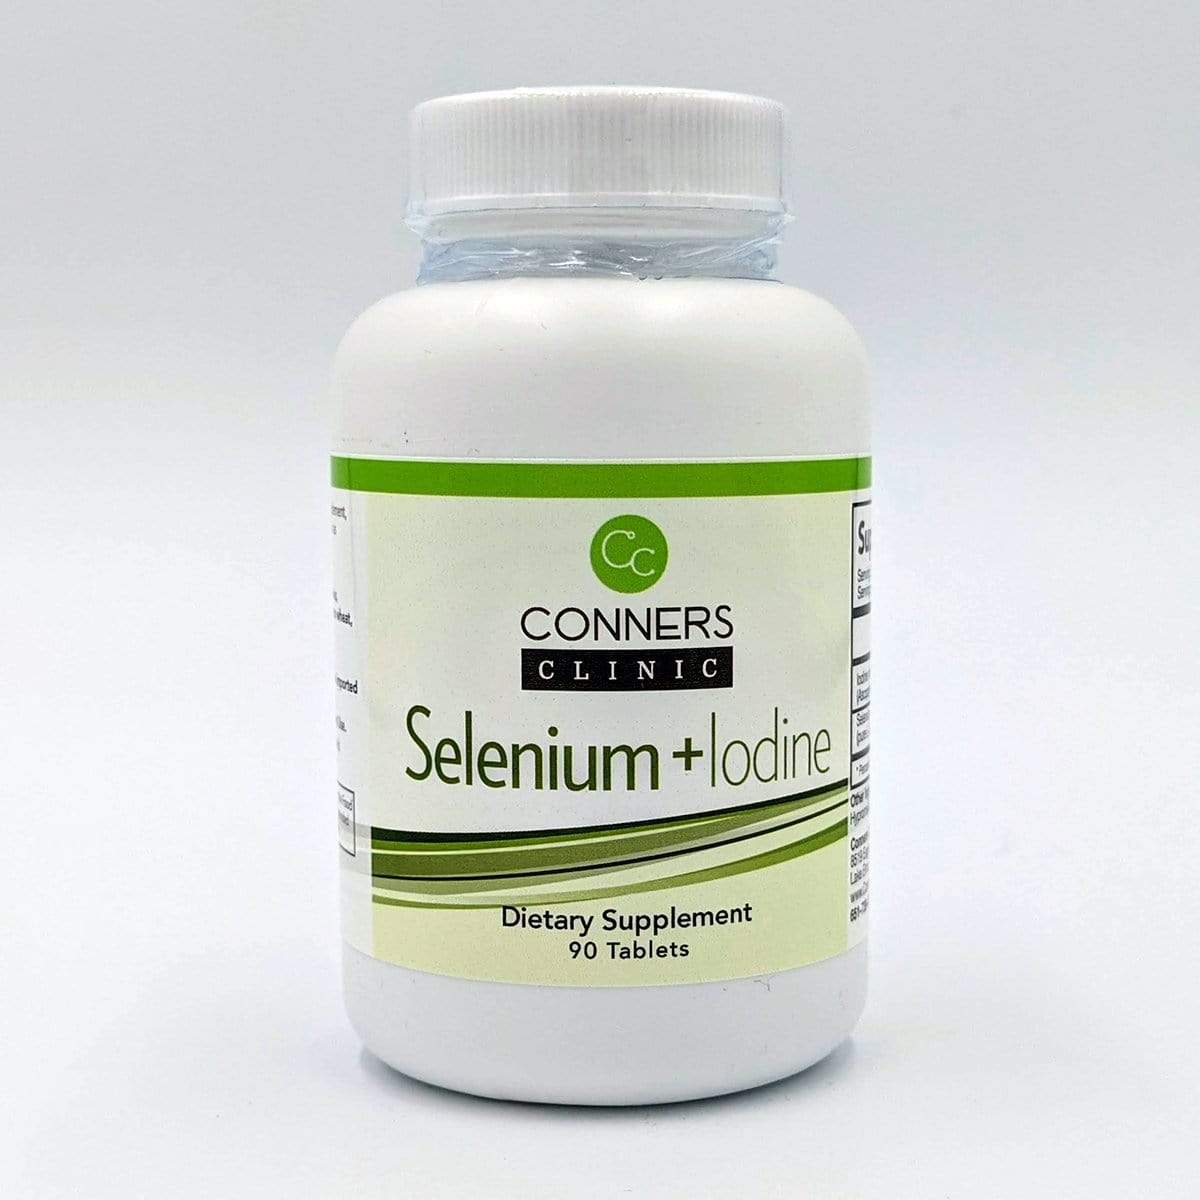 Selenium+Iodine - 90 Tabs - Selenometh-Iodine Conners Clinic Supplement - Conners Clinic